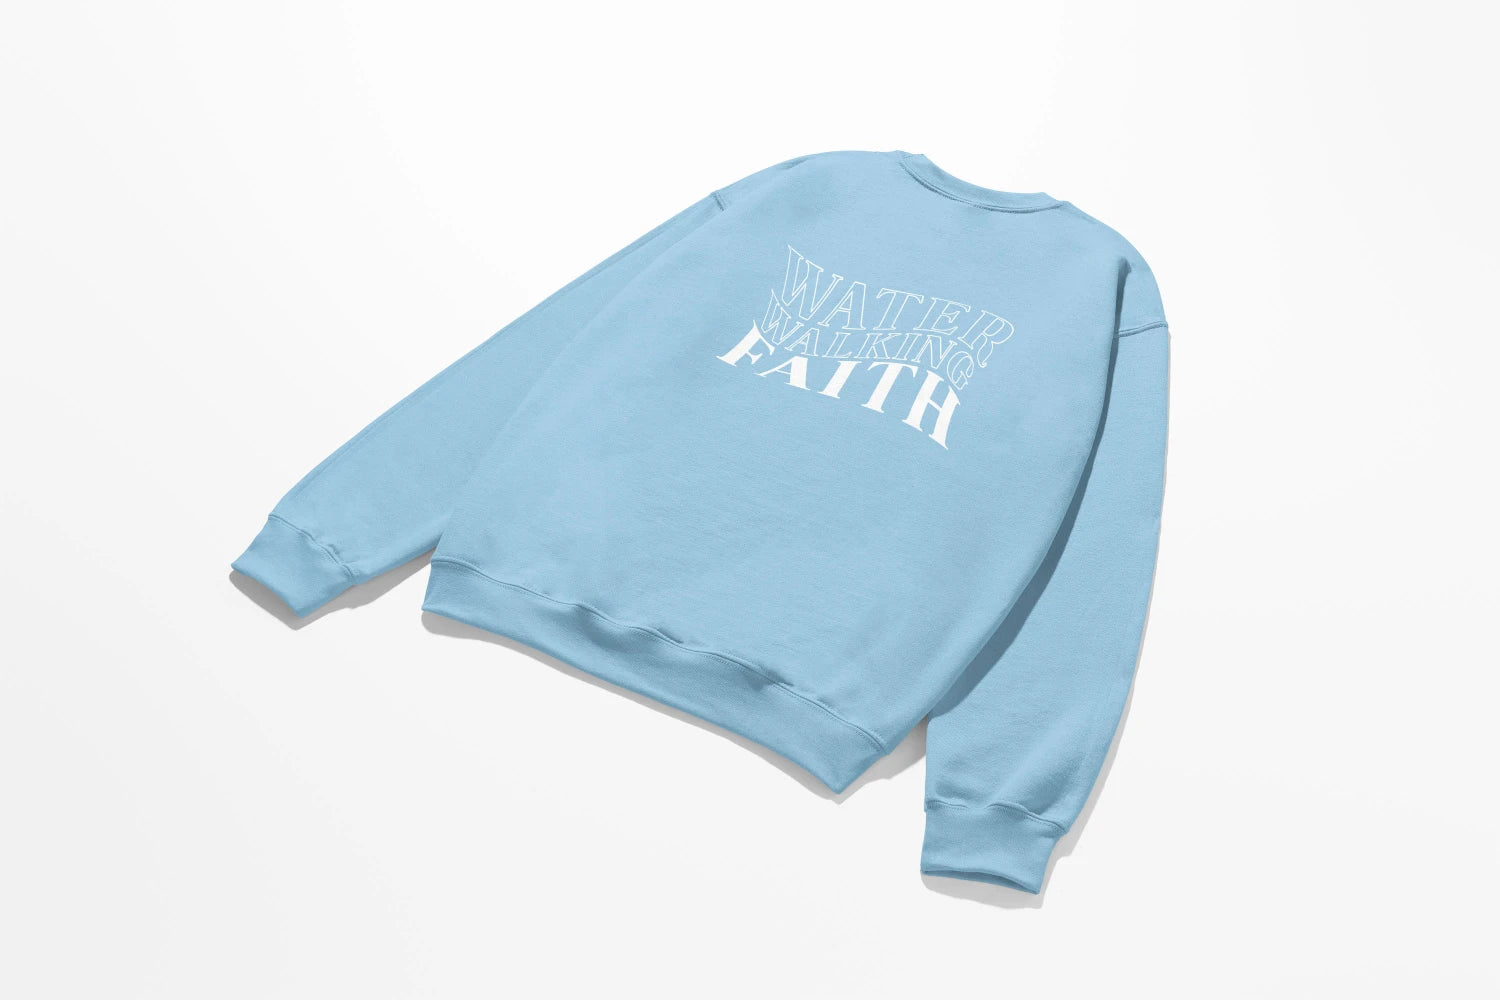 A blue Water Walking Faith Sweatshirt with white text that says "Water Walking Faith" on it. (Brand: Be Still and Know)